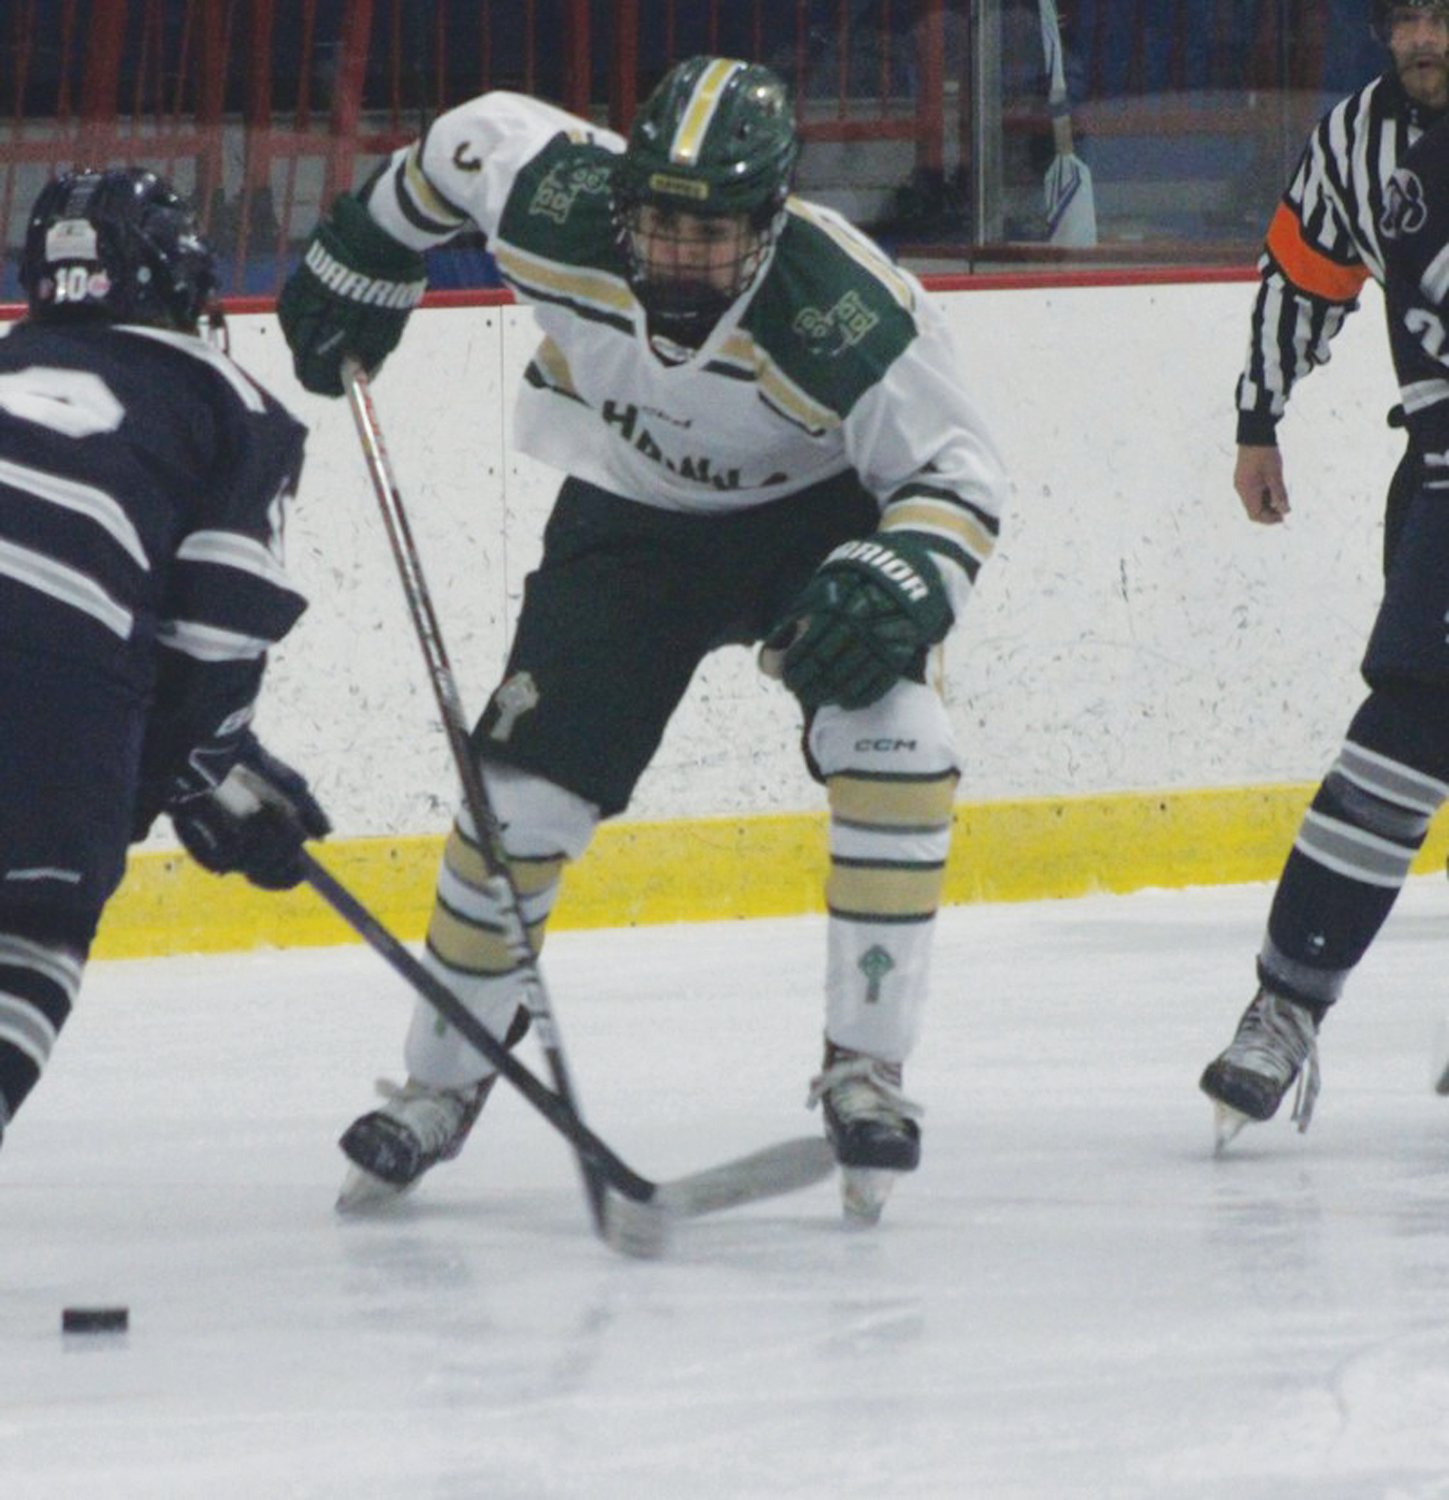 UP THE ICE: Griffin Crain skates past defenders. (Photos by Alex Sponseller)